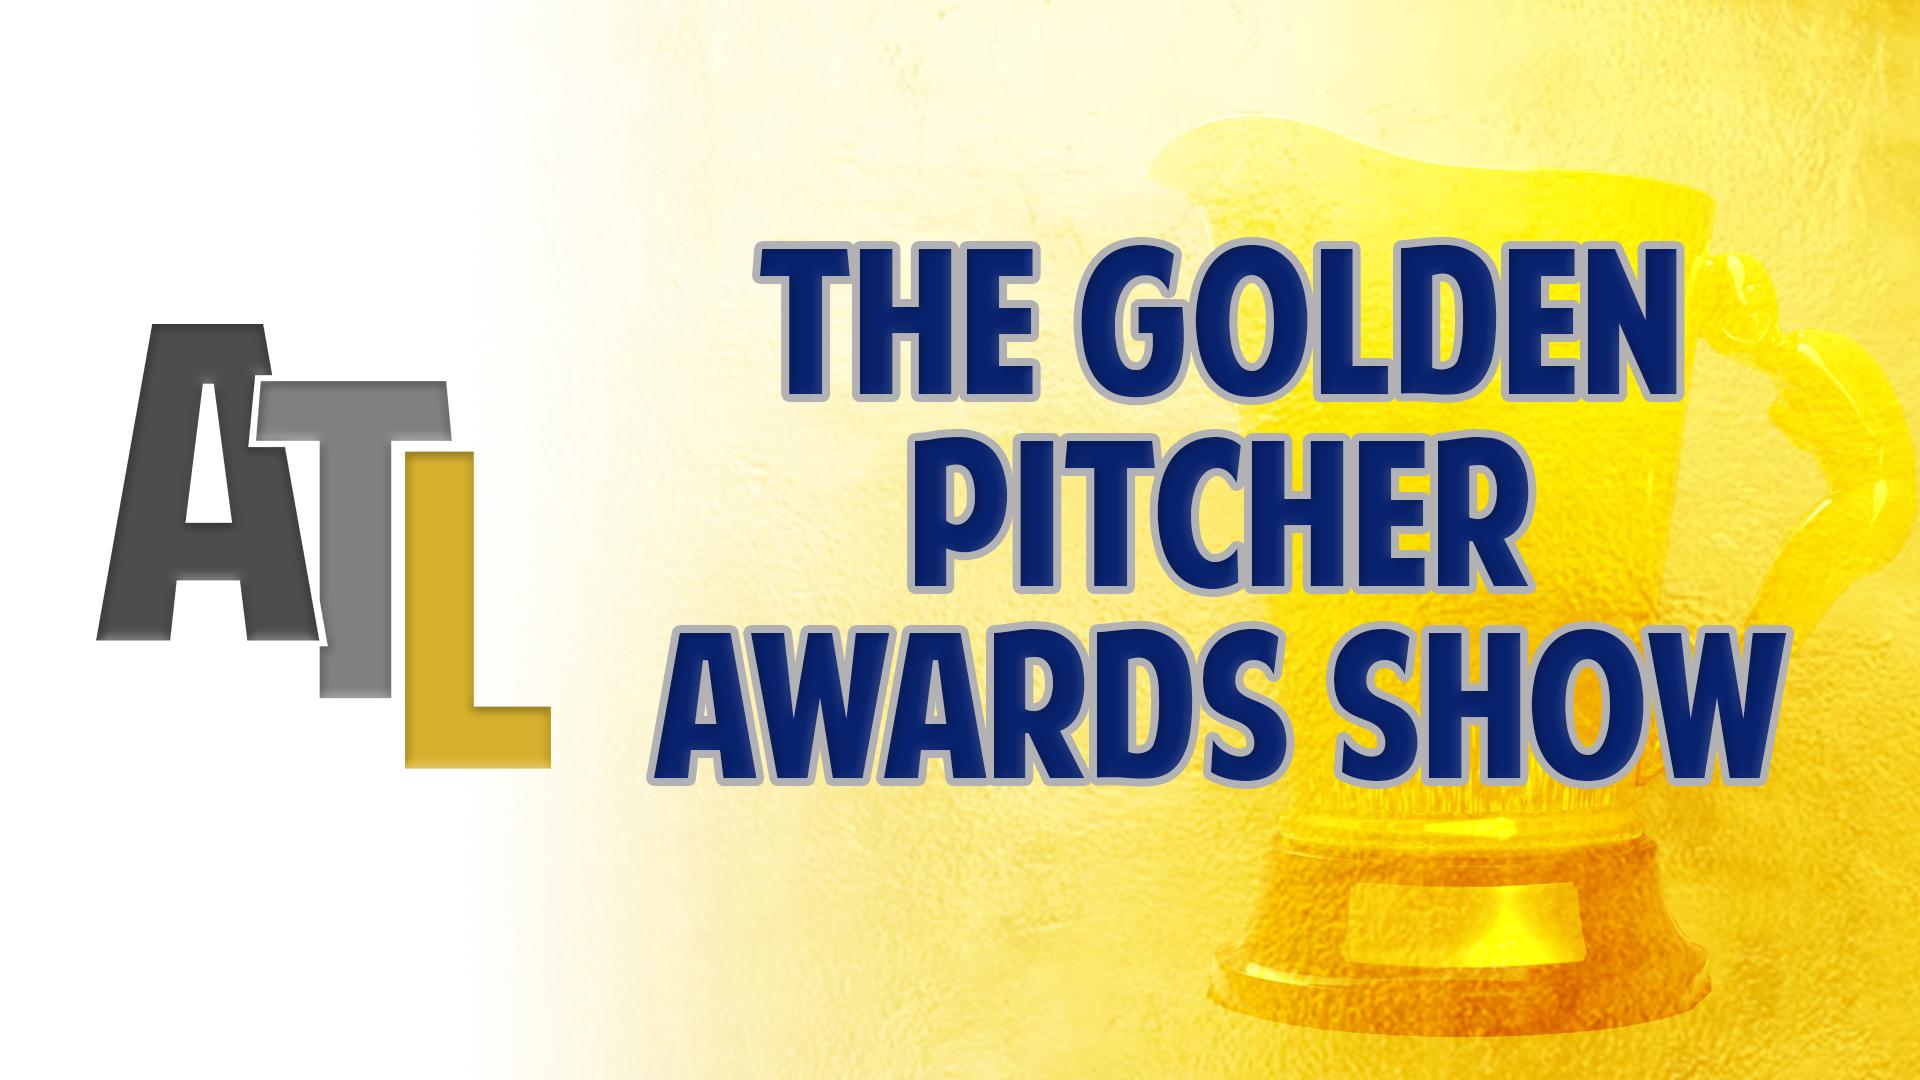 Simulcast of The Golden Pitcher Awards Show